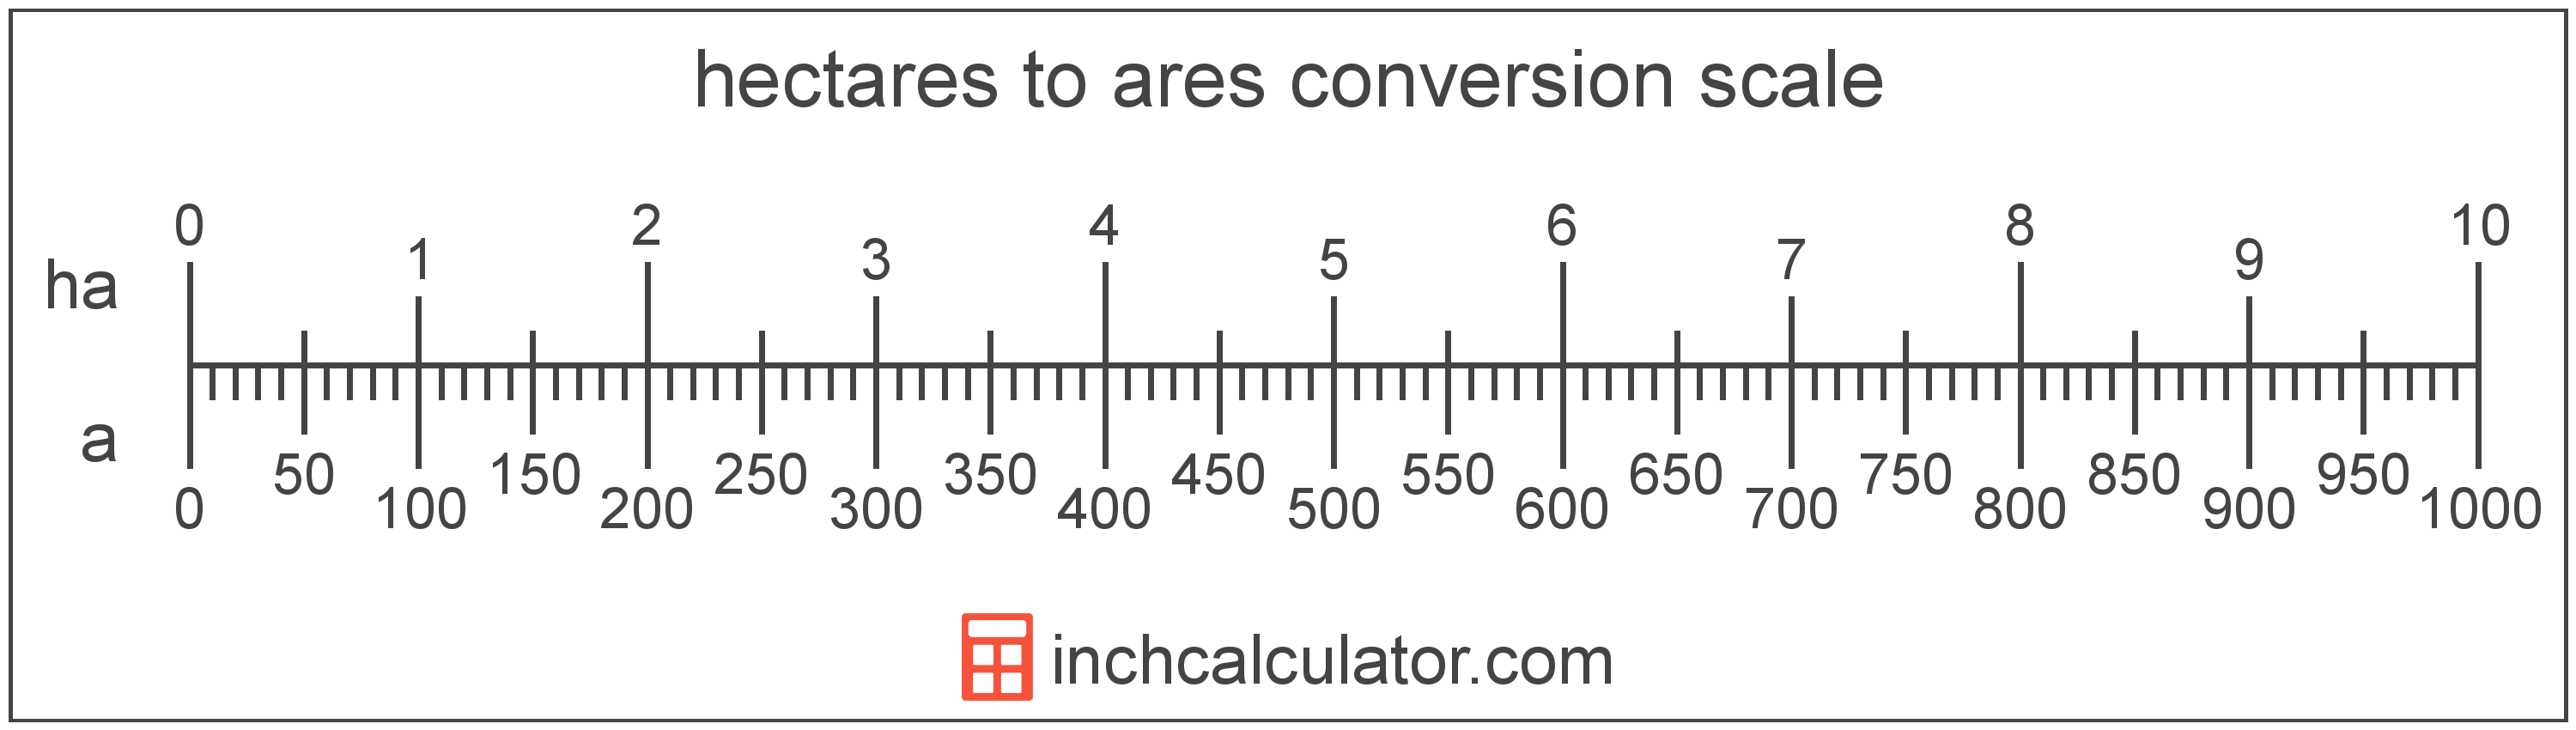 conversion scale showing hectares and equivalent ares area values